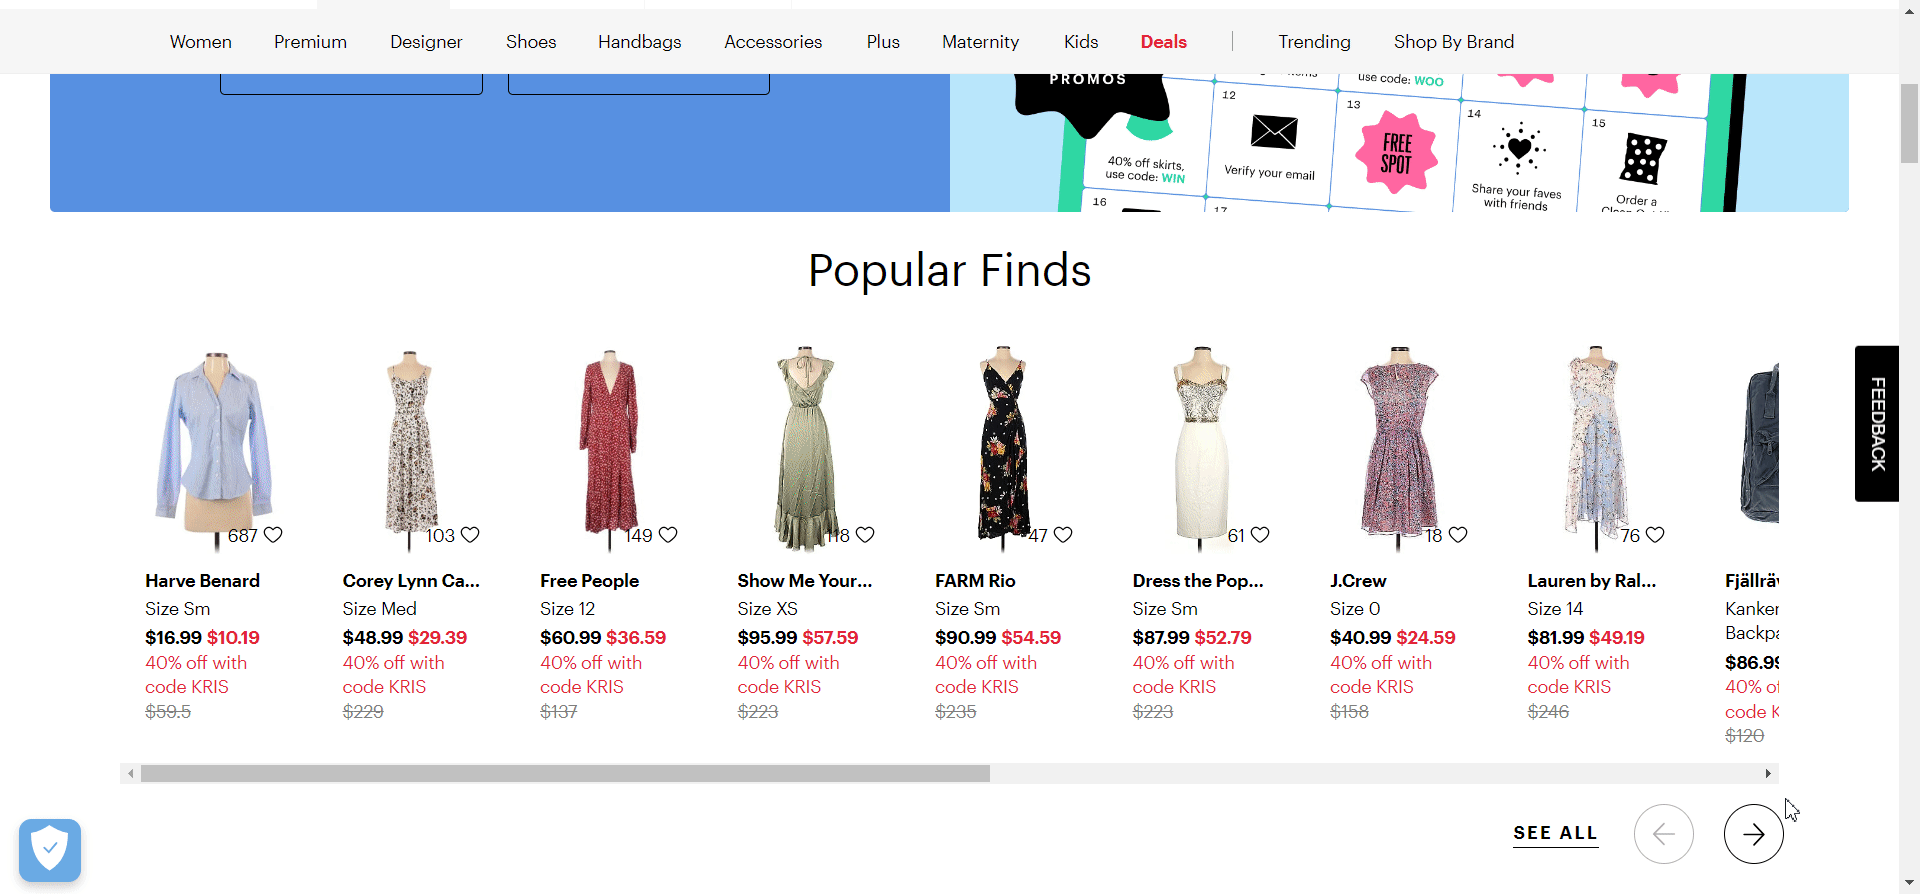 Product sliders example from thredUP site. 